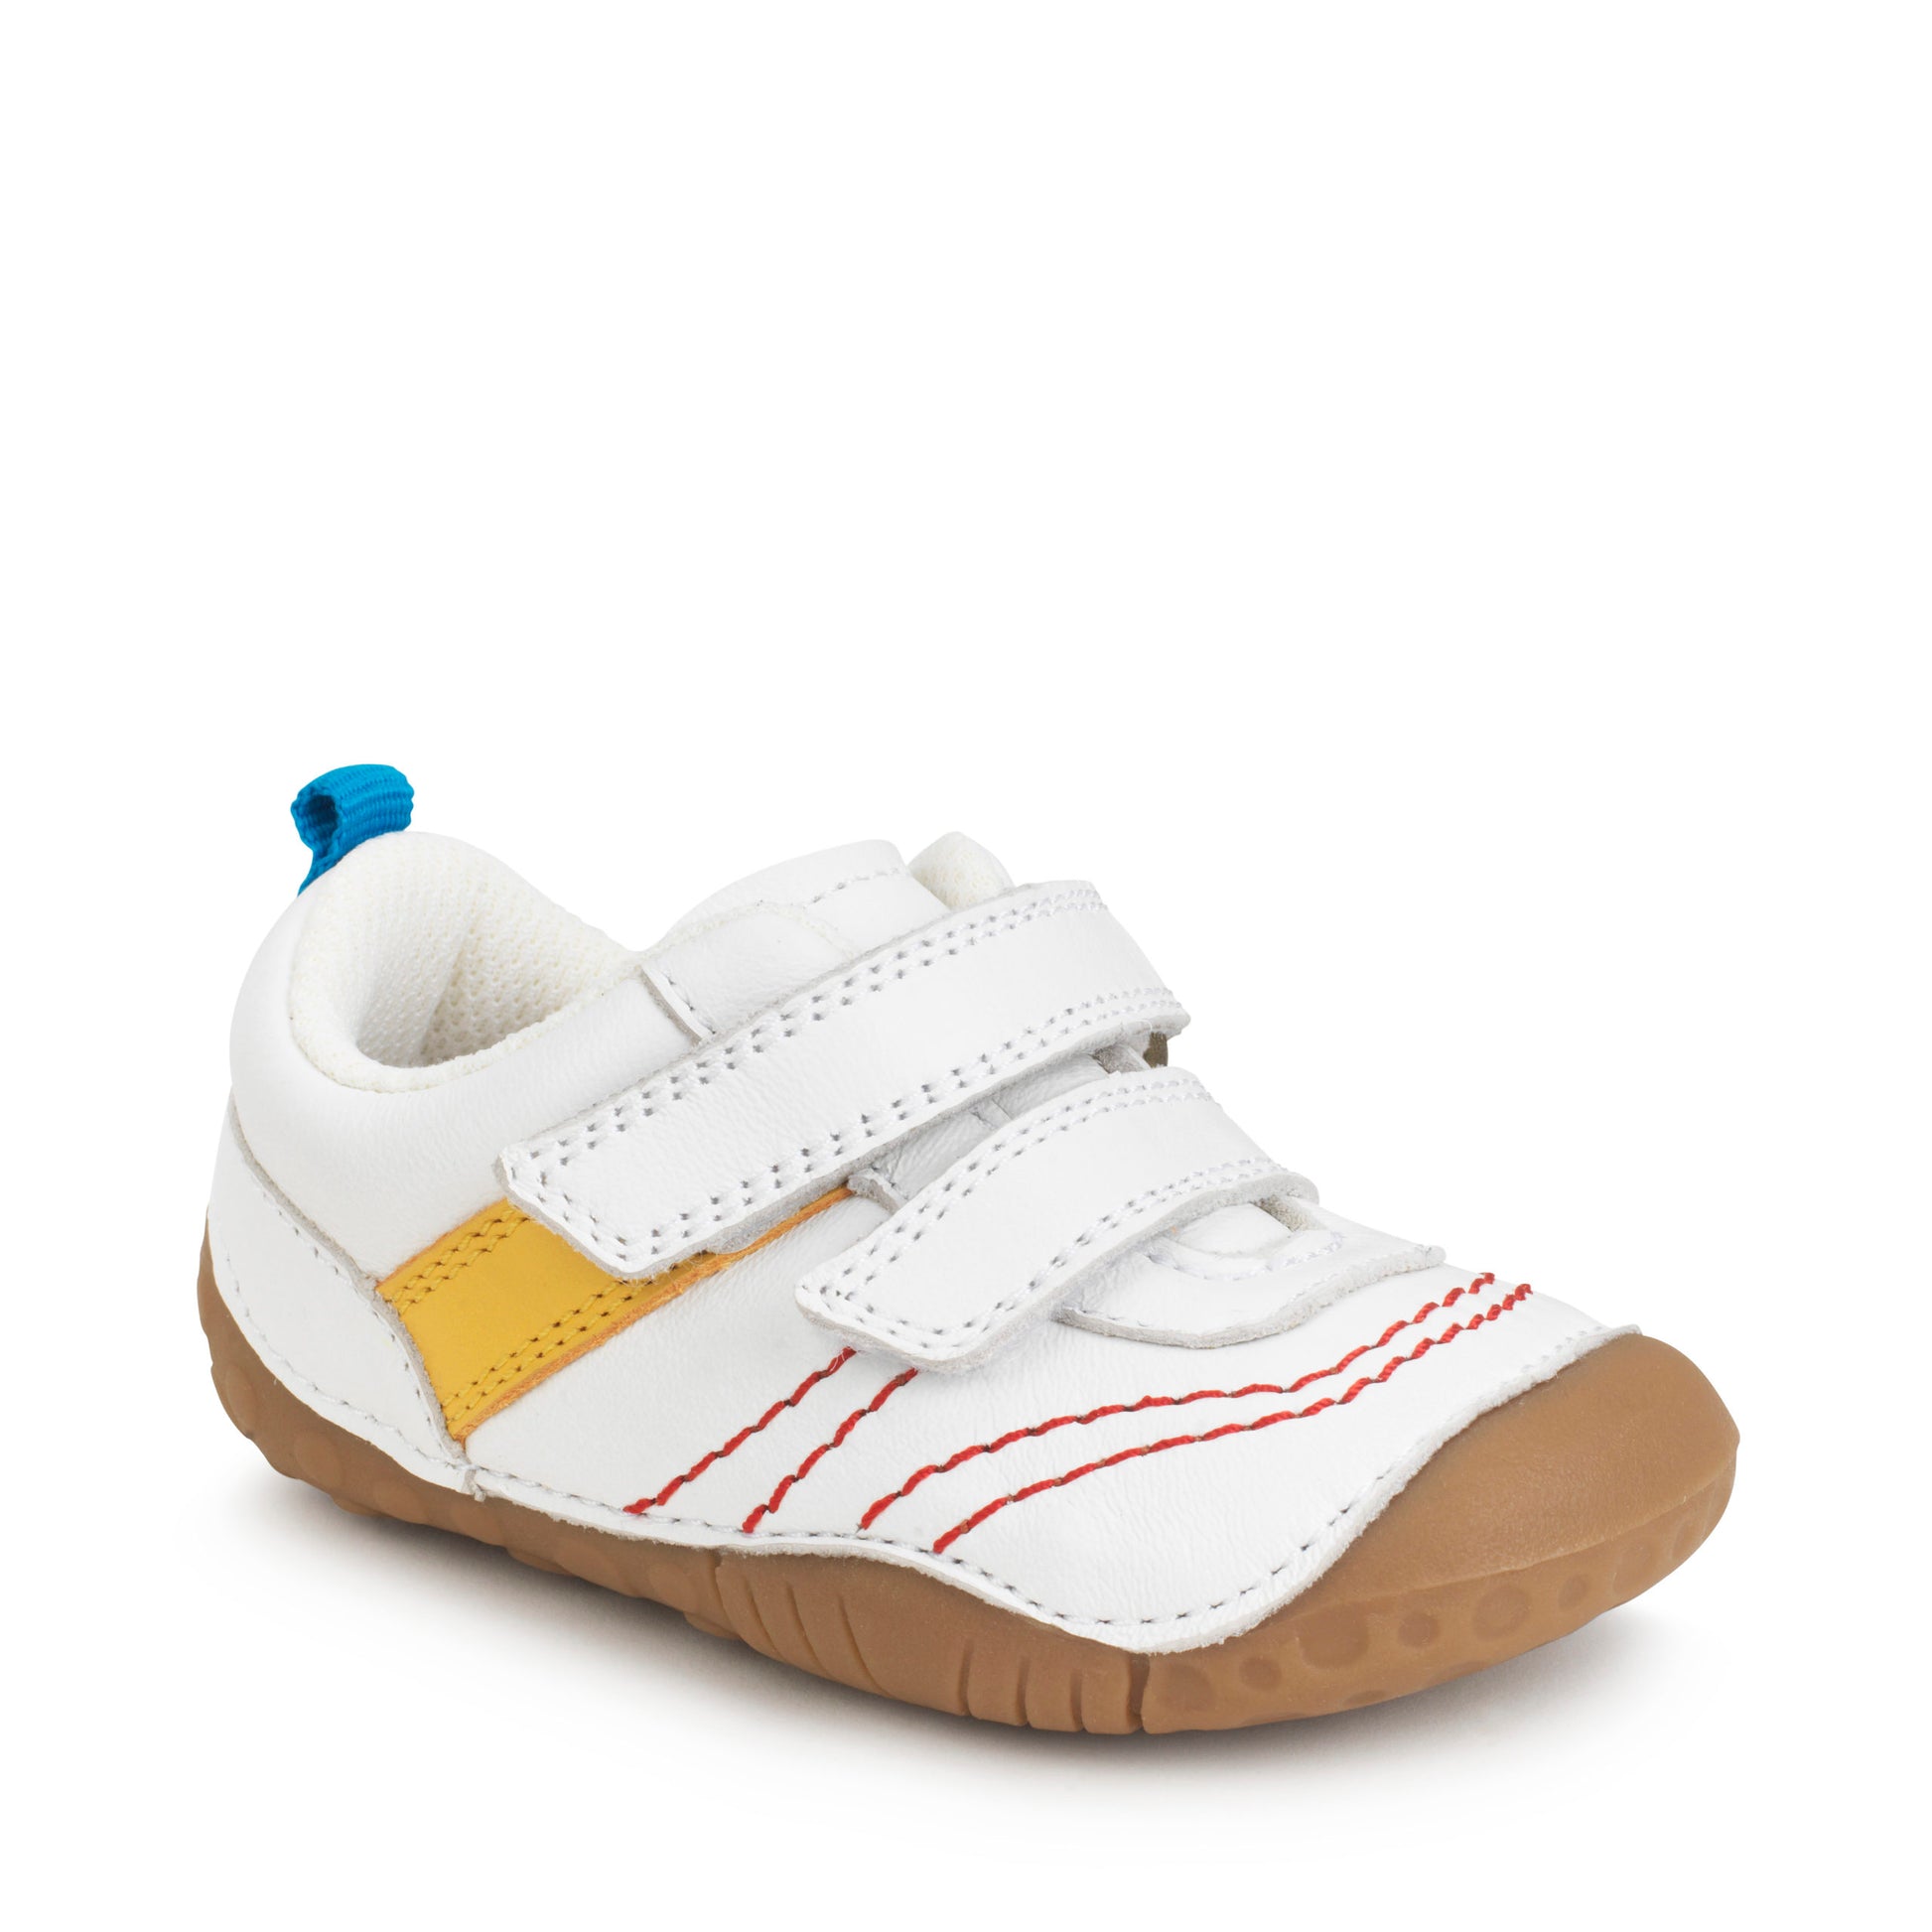 A boys pre-walker by Start-Rite, style Little Smile, white leather double velcro with yellow strip, red stitch detail and blue heel tab, light rubber sole with bumper. Angled view of right shoe.